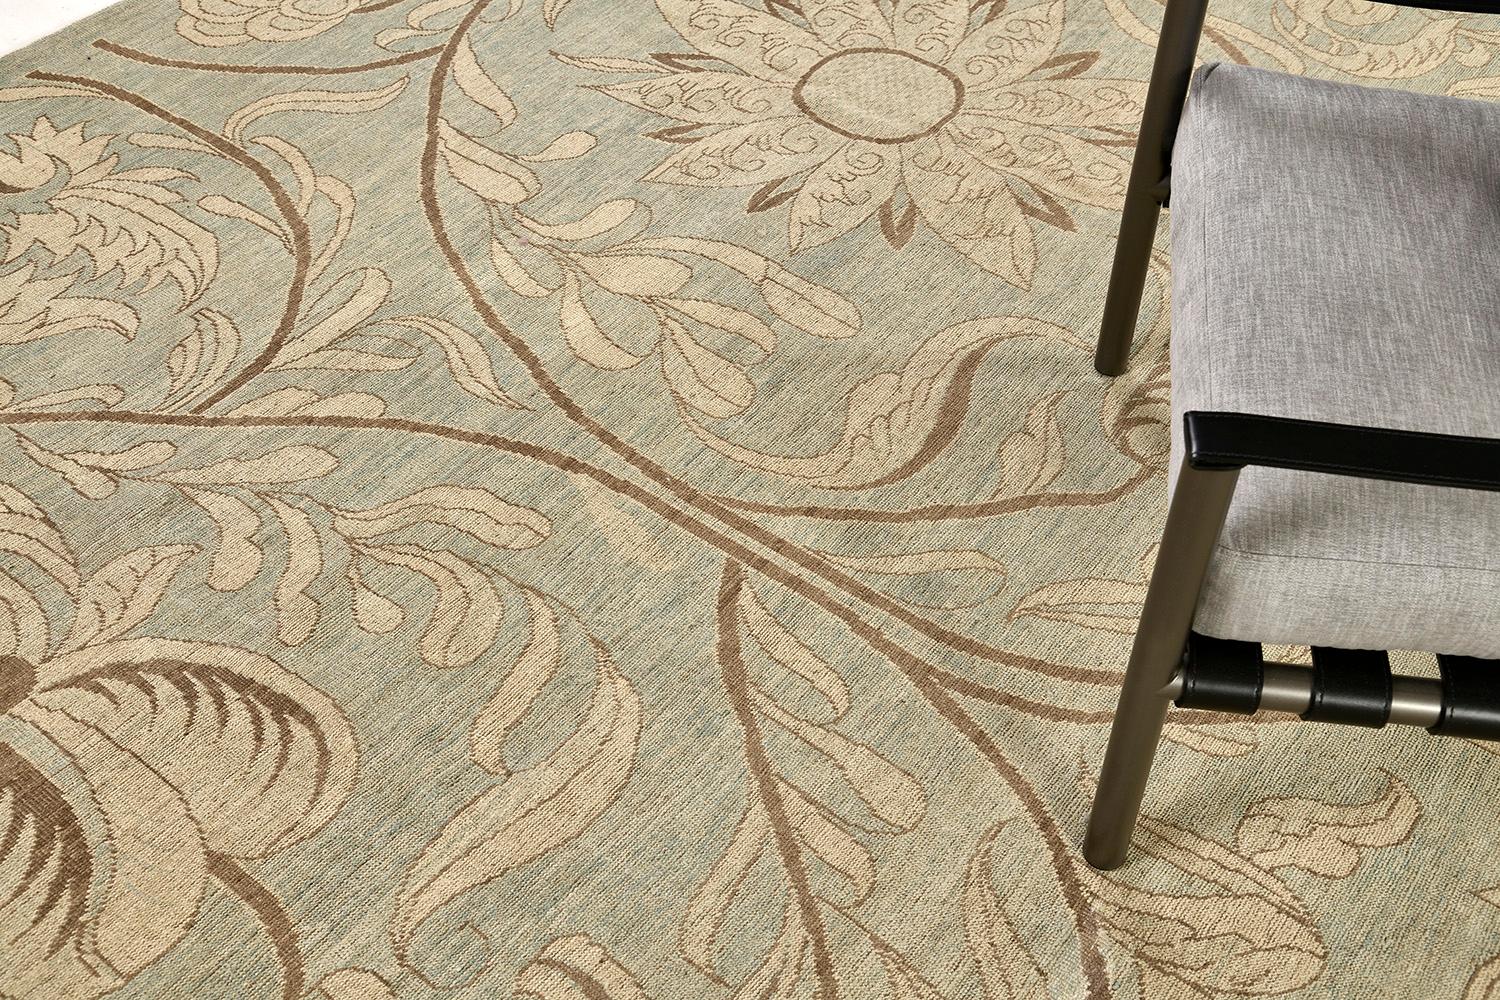 A dreamy vintage style floral design rug that showcases the graceful detailing of its botanical composition all over the dusty blue field. Featuring the golden stem accents that makes the rug unique and regal on its own way. A magnificent rug that